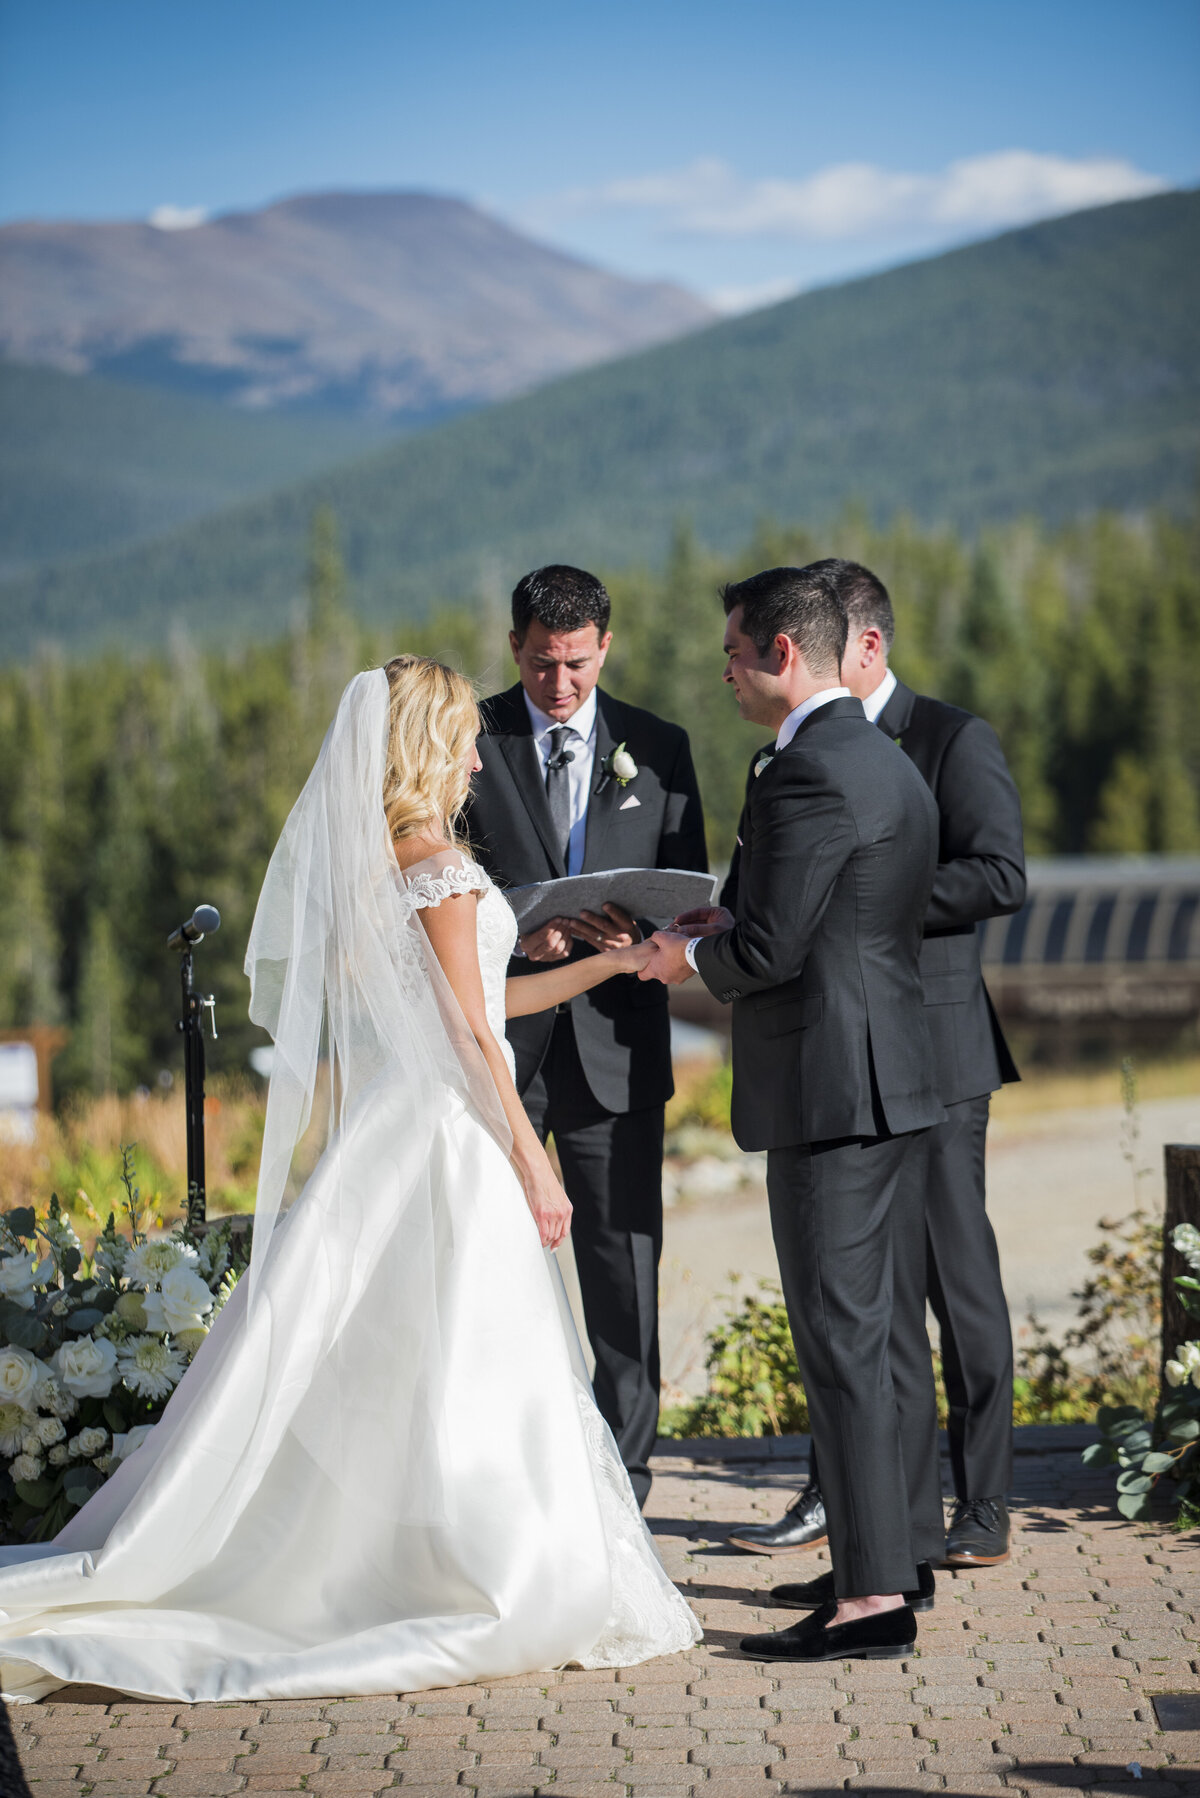 A groom holds his bride's hand during the outdoor wedding ceremony in Denver, Colorado with a mountain landscape in the background.